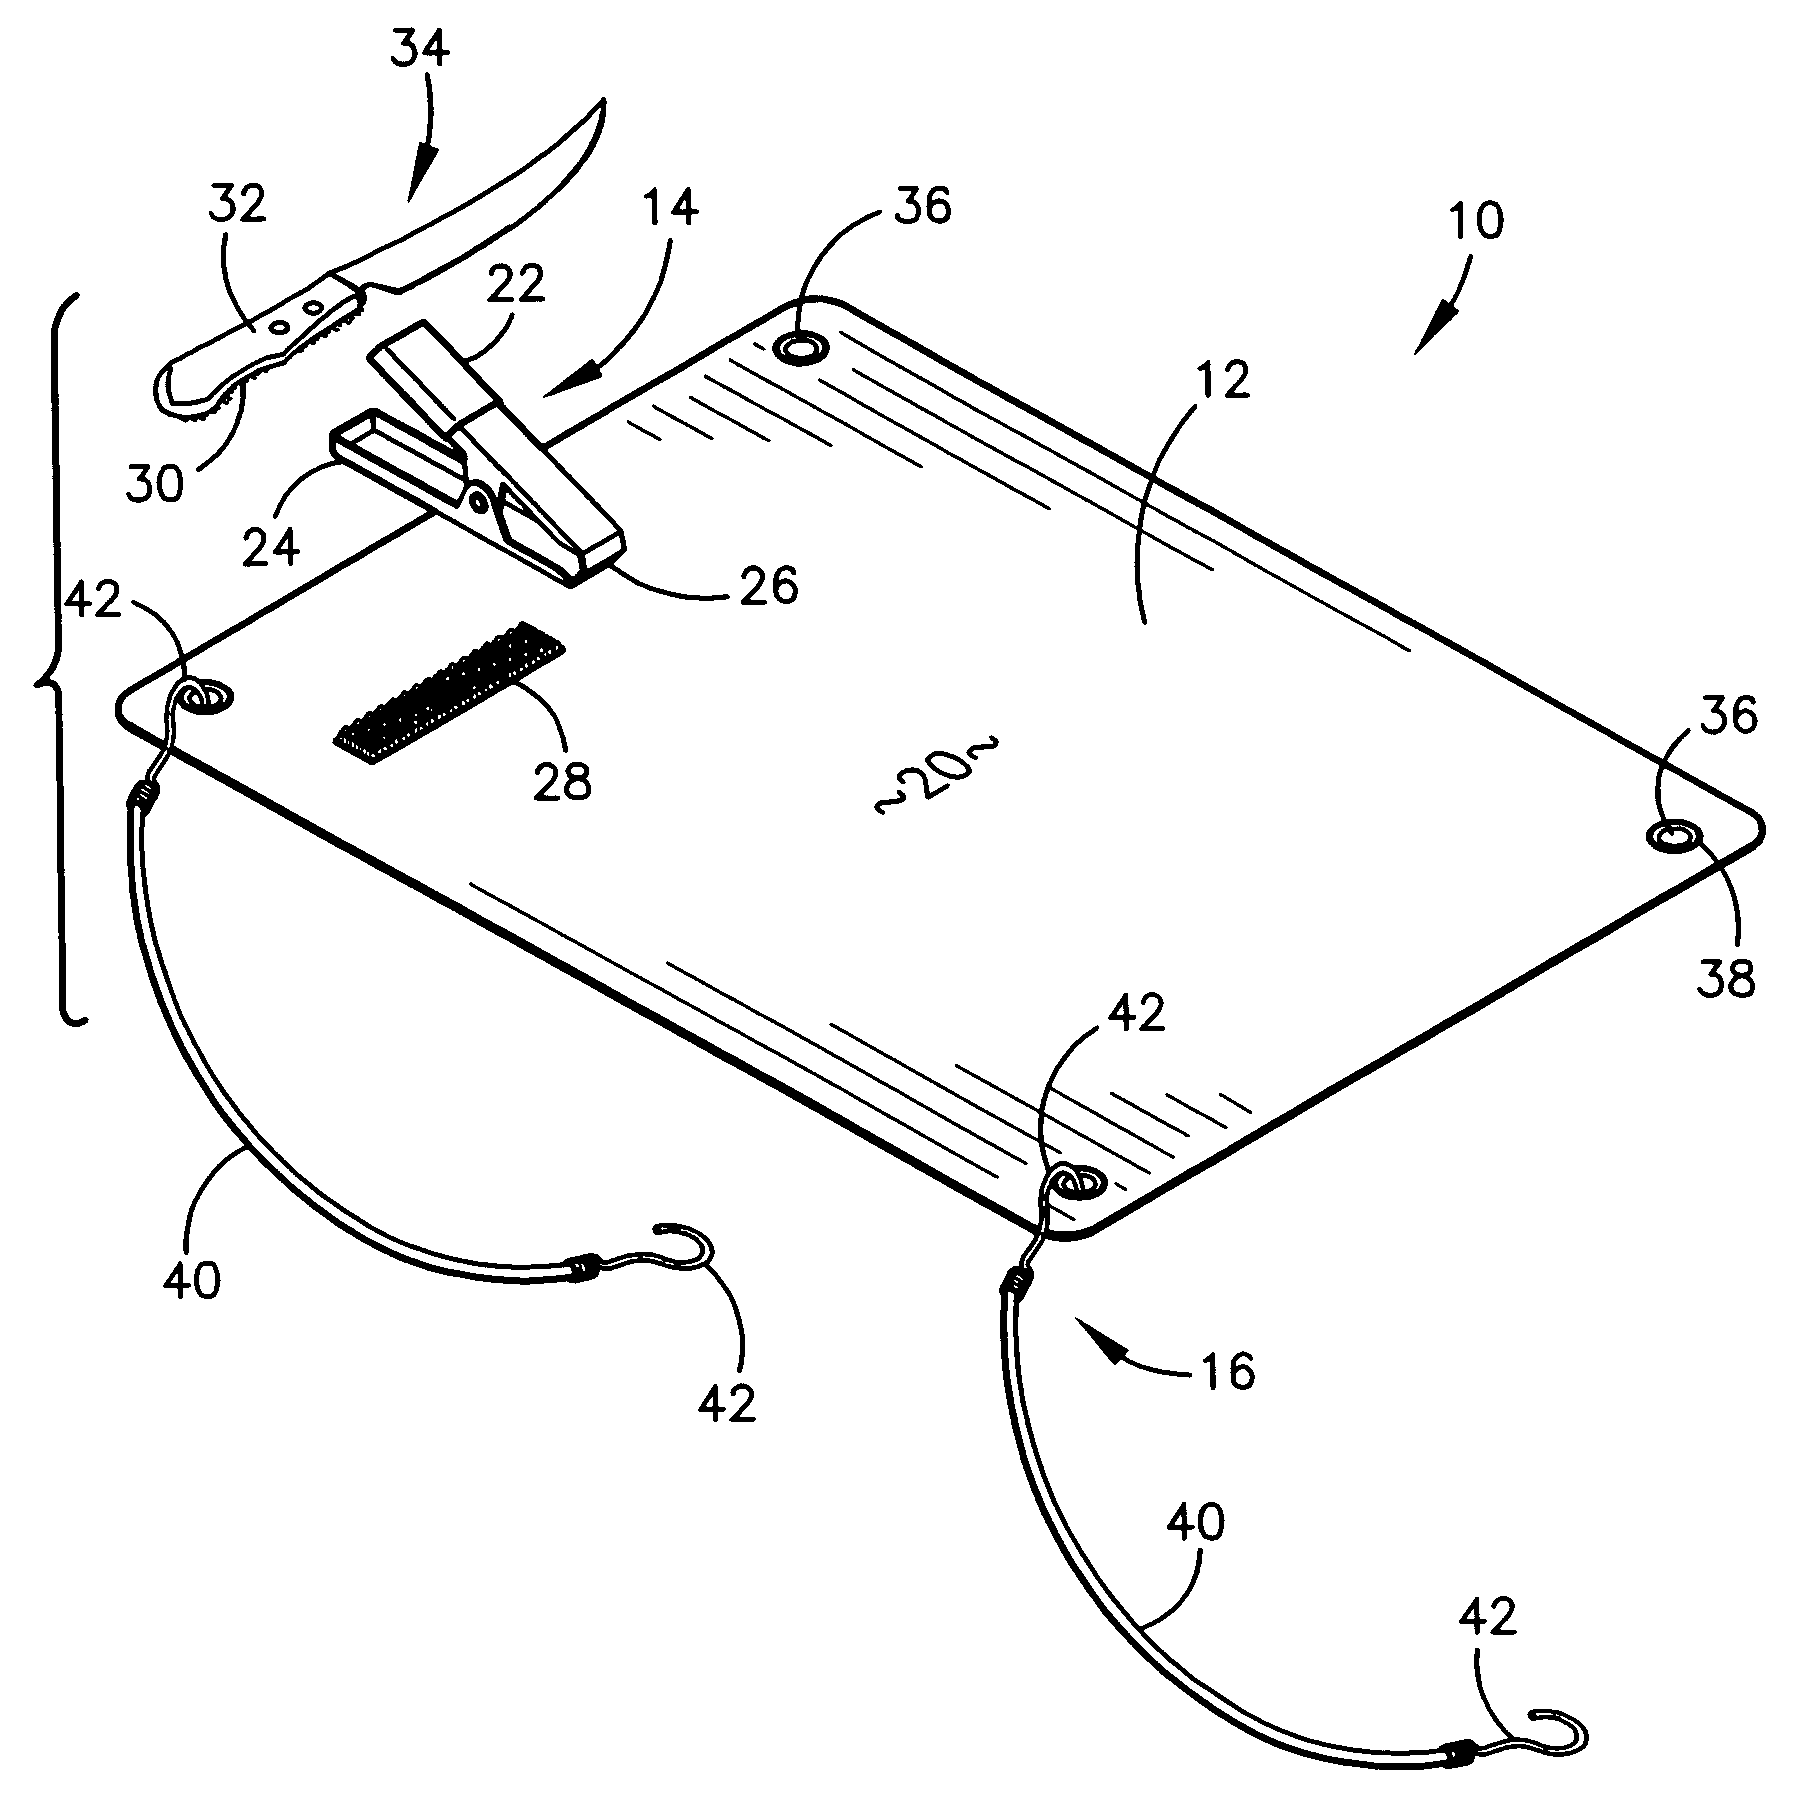 Filleting assembly and method of using same